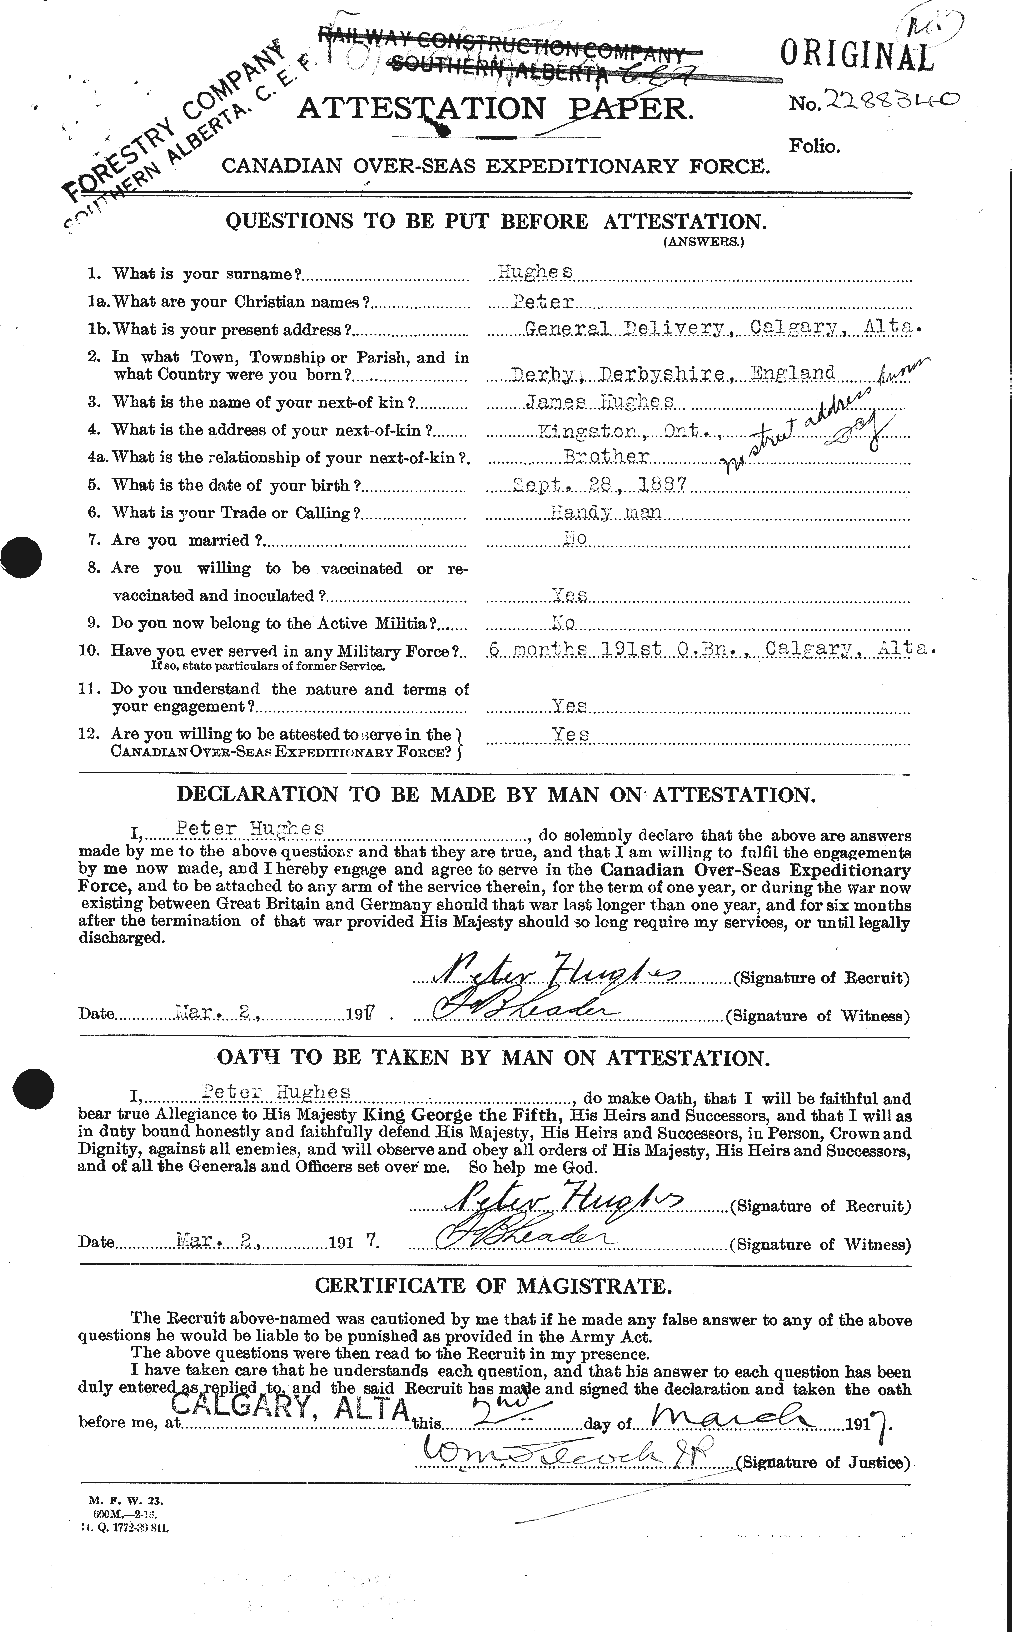 Personnel Records of the First World War - CEF 404161a